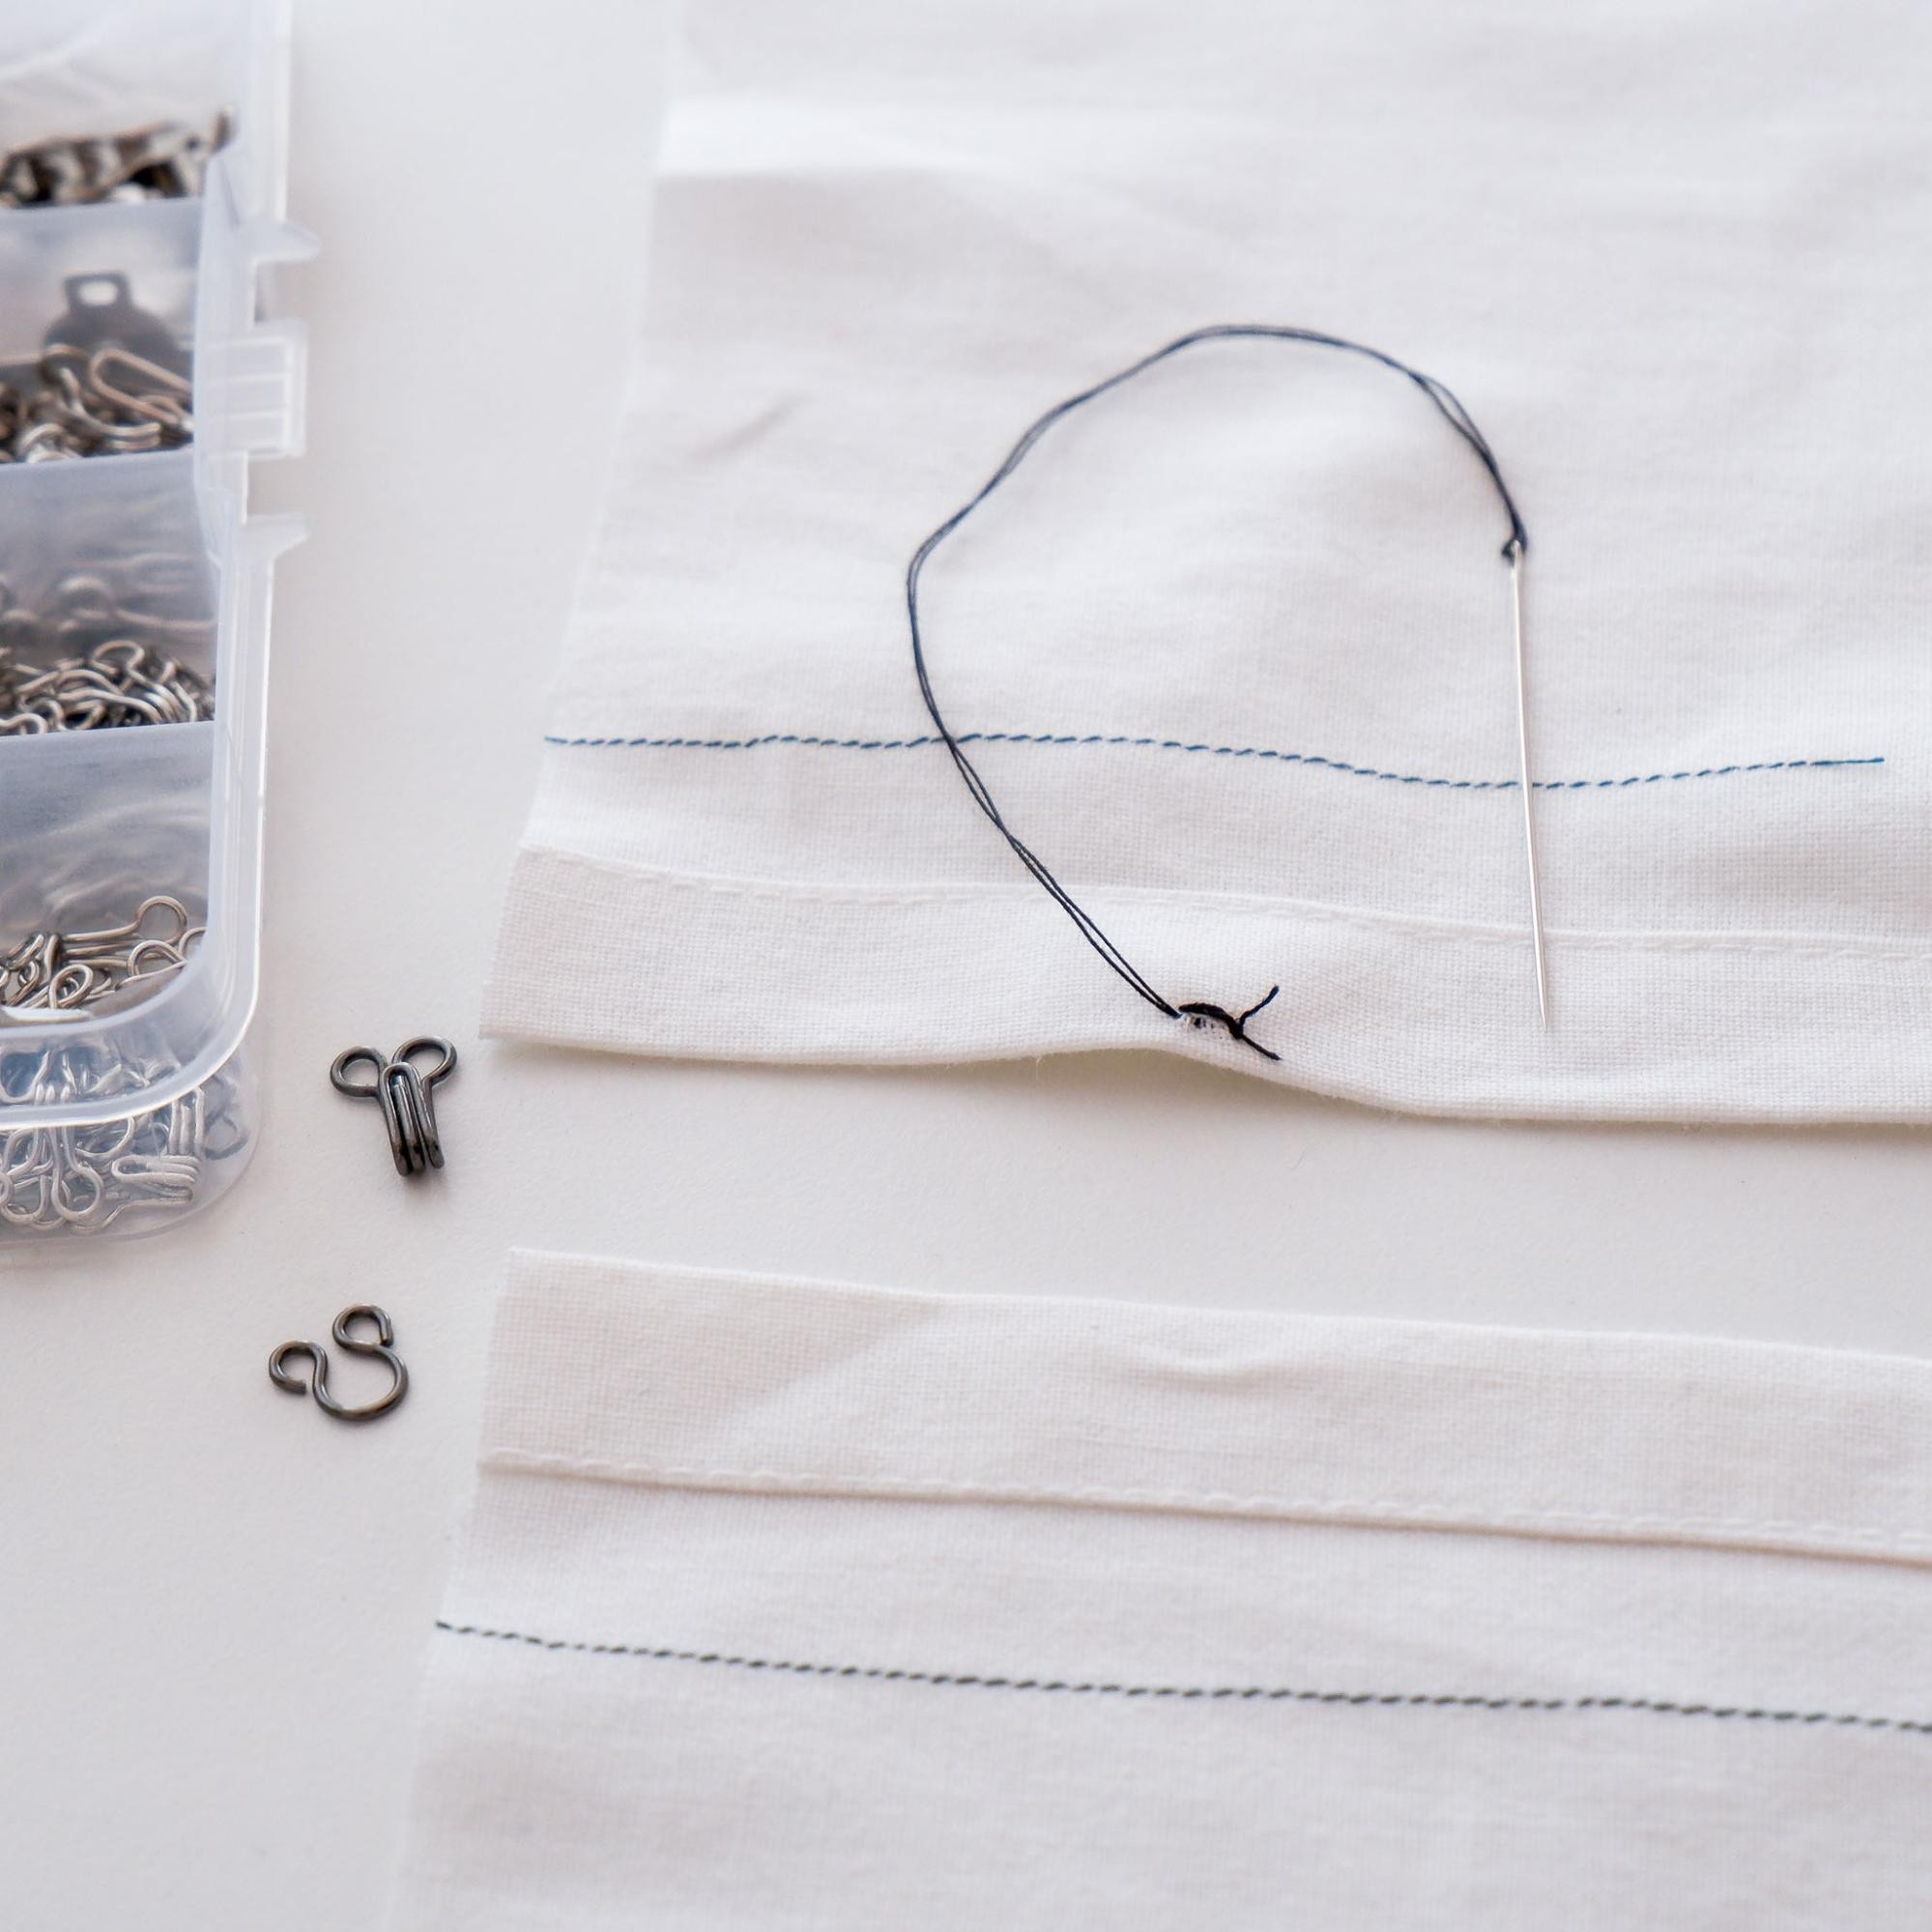 Hand stitch with a knot to sew on the hook of the hook and eye set